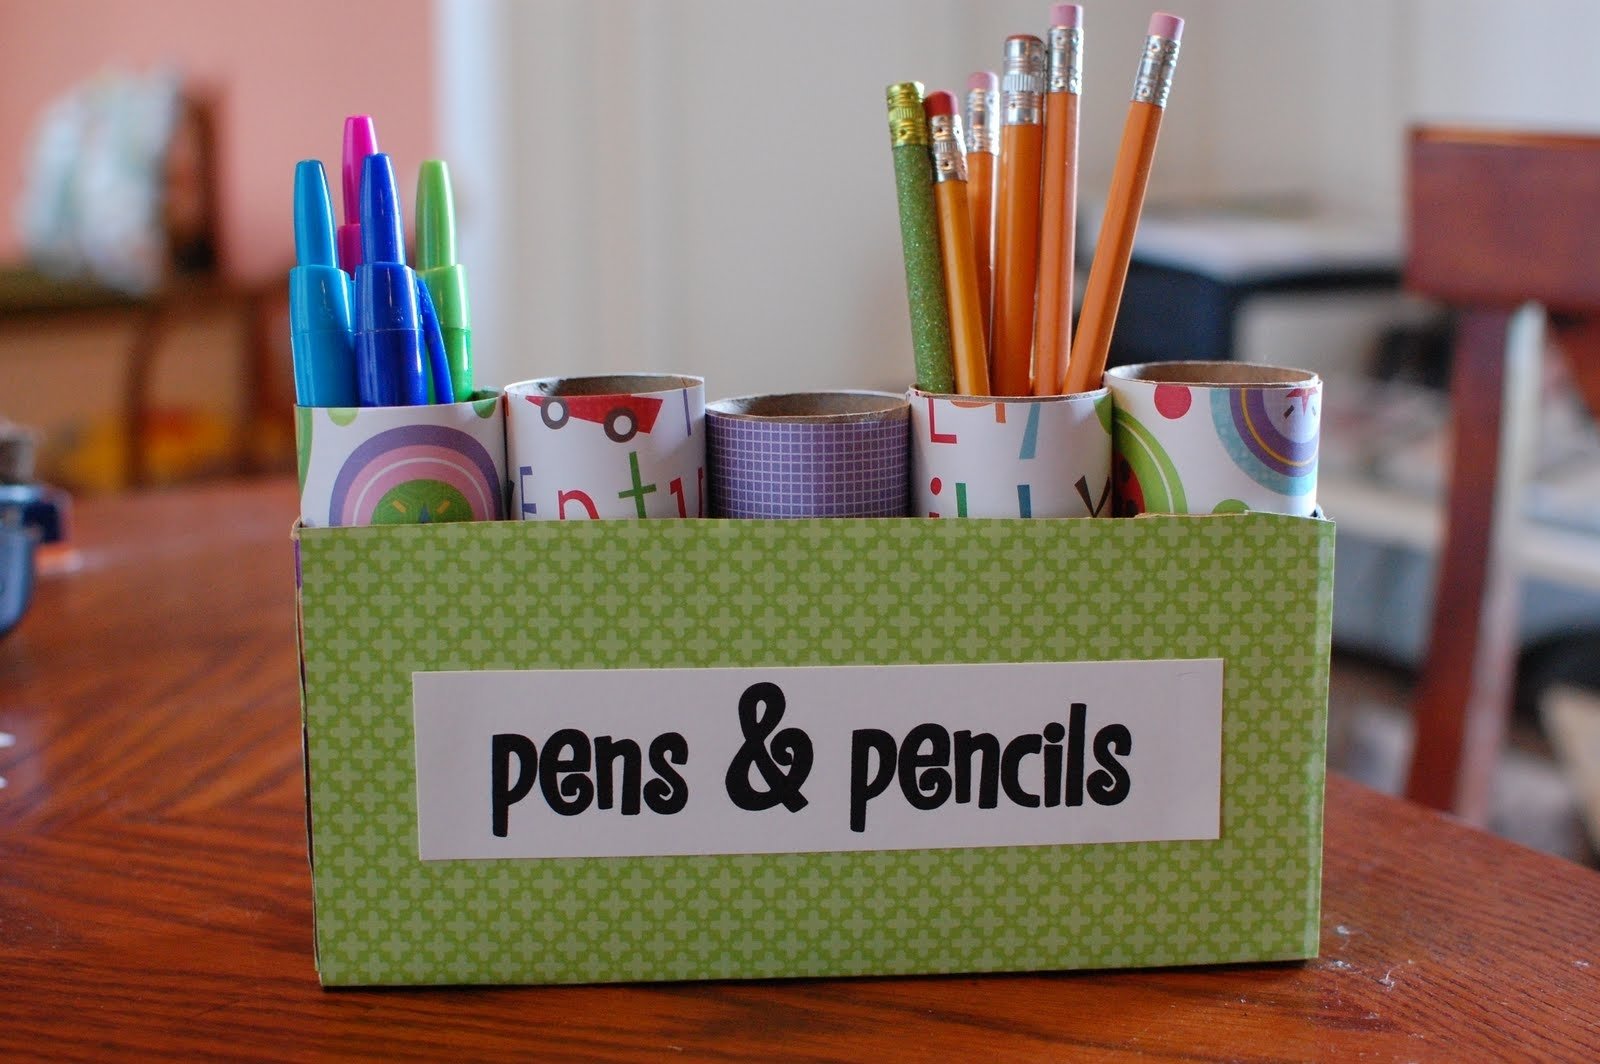 10 Wonderful Recycle Project Ideas For School homework caddy desk recycle project ideas home design 7 for school 2022